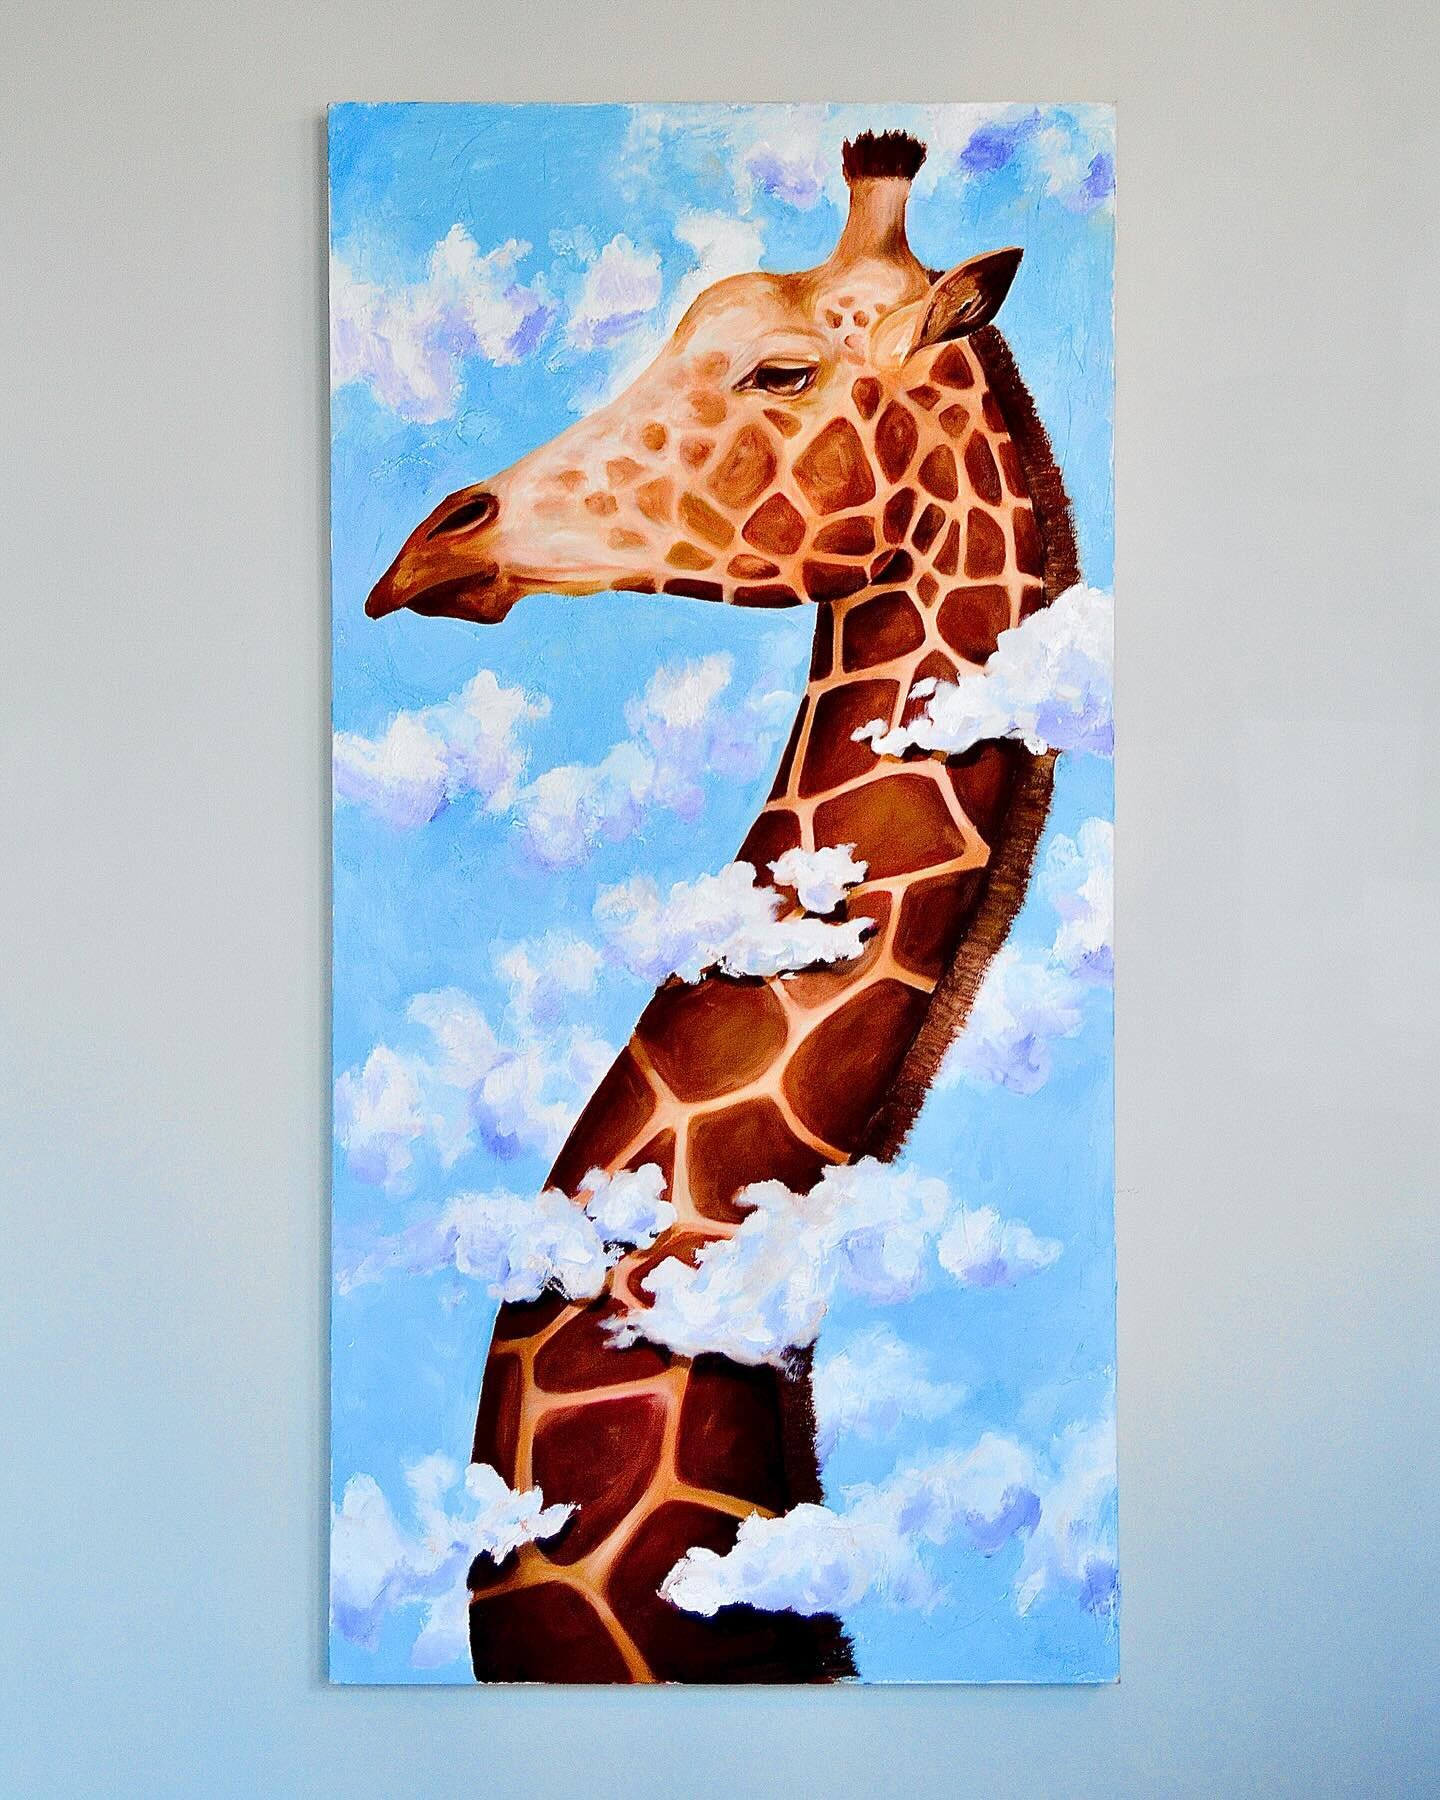 &ldquo;UP&rdquo; 🦒☁️ (FOR SALE)

24 x 48
Oil on Canvas 
$1500

This playful painting would love a new home! Its large format makes it perfect to fill up a wall and be the centerpiece of a space. It&rsquo;s painted on a deep profile gallery wrapped c